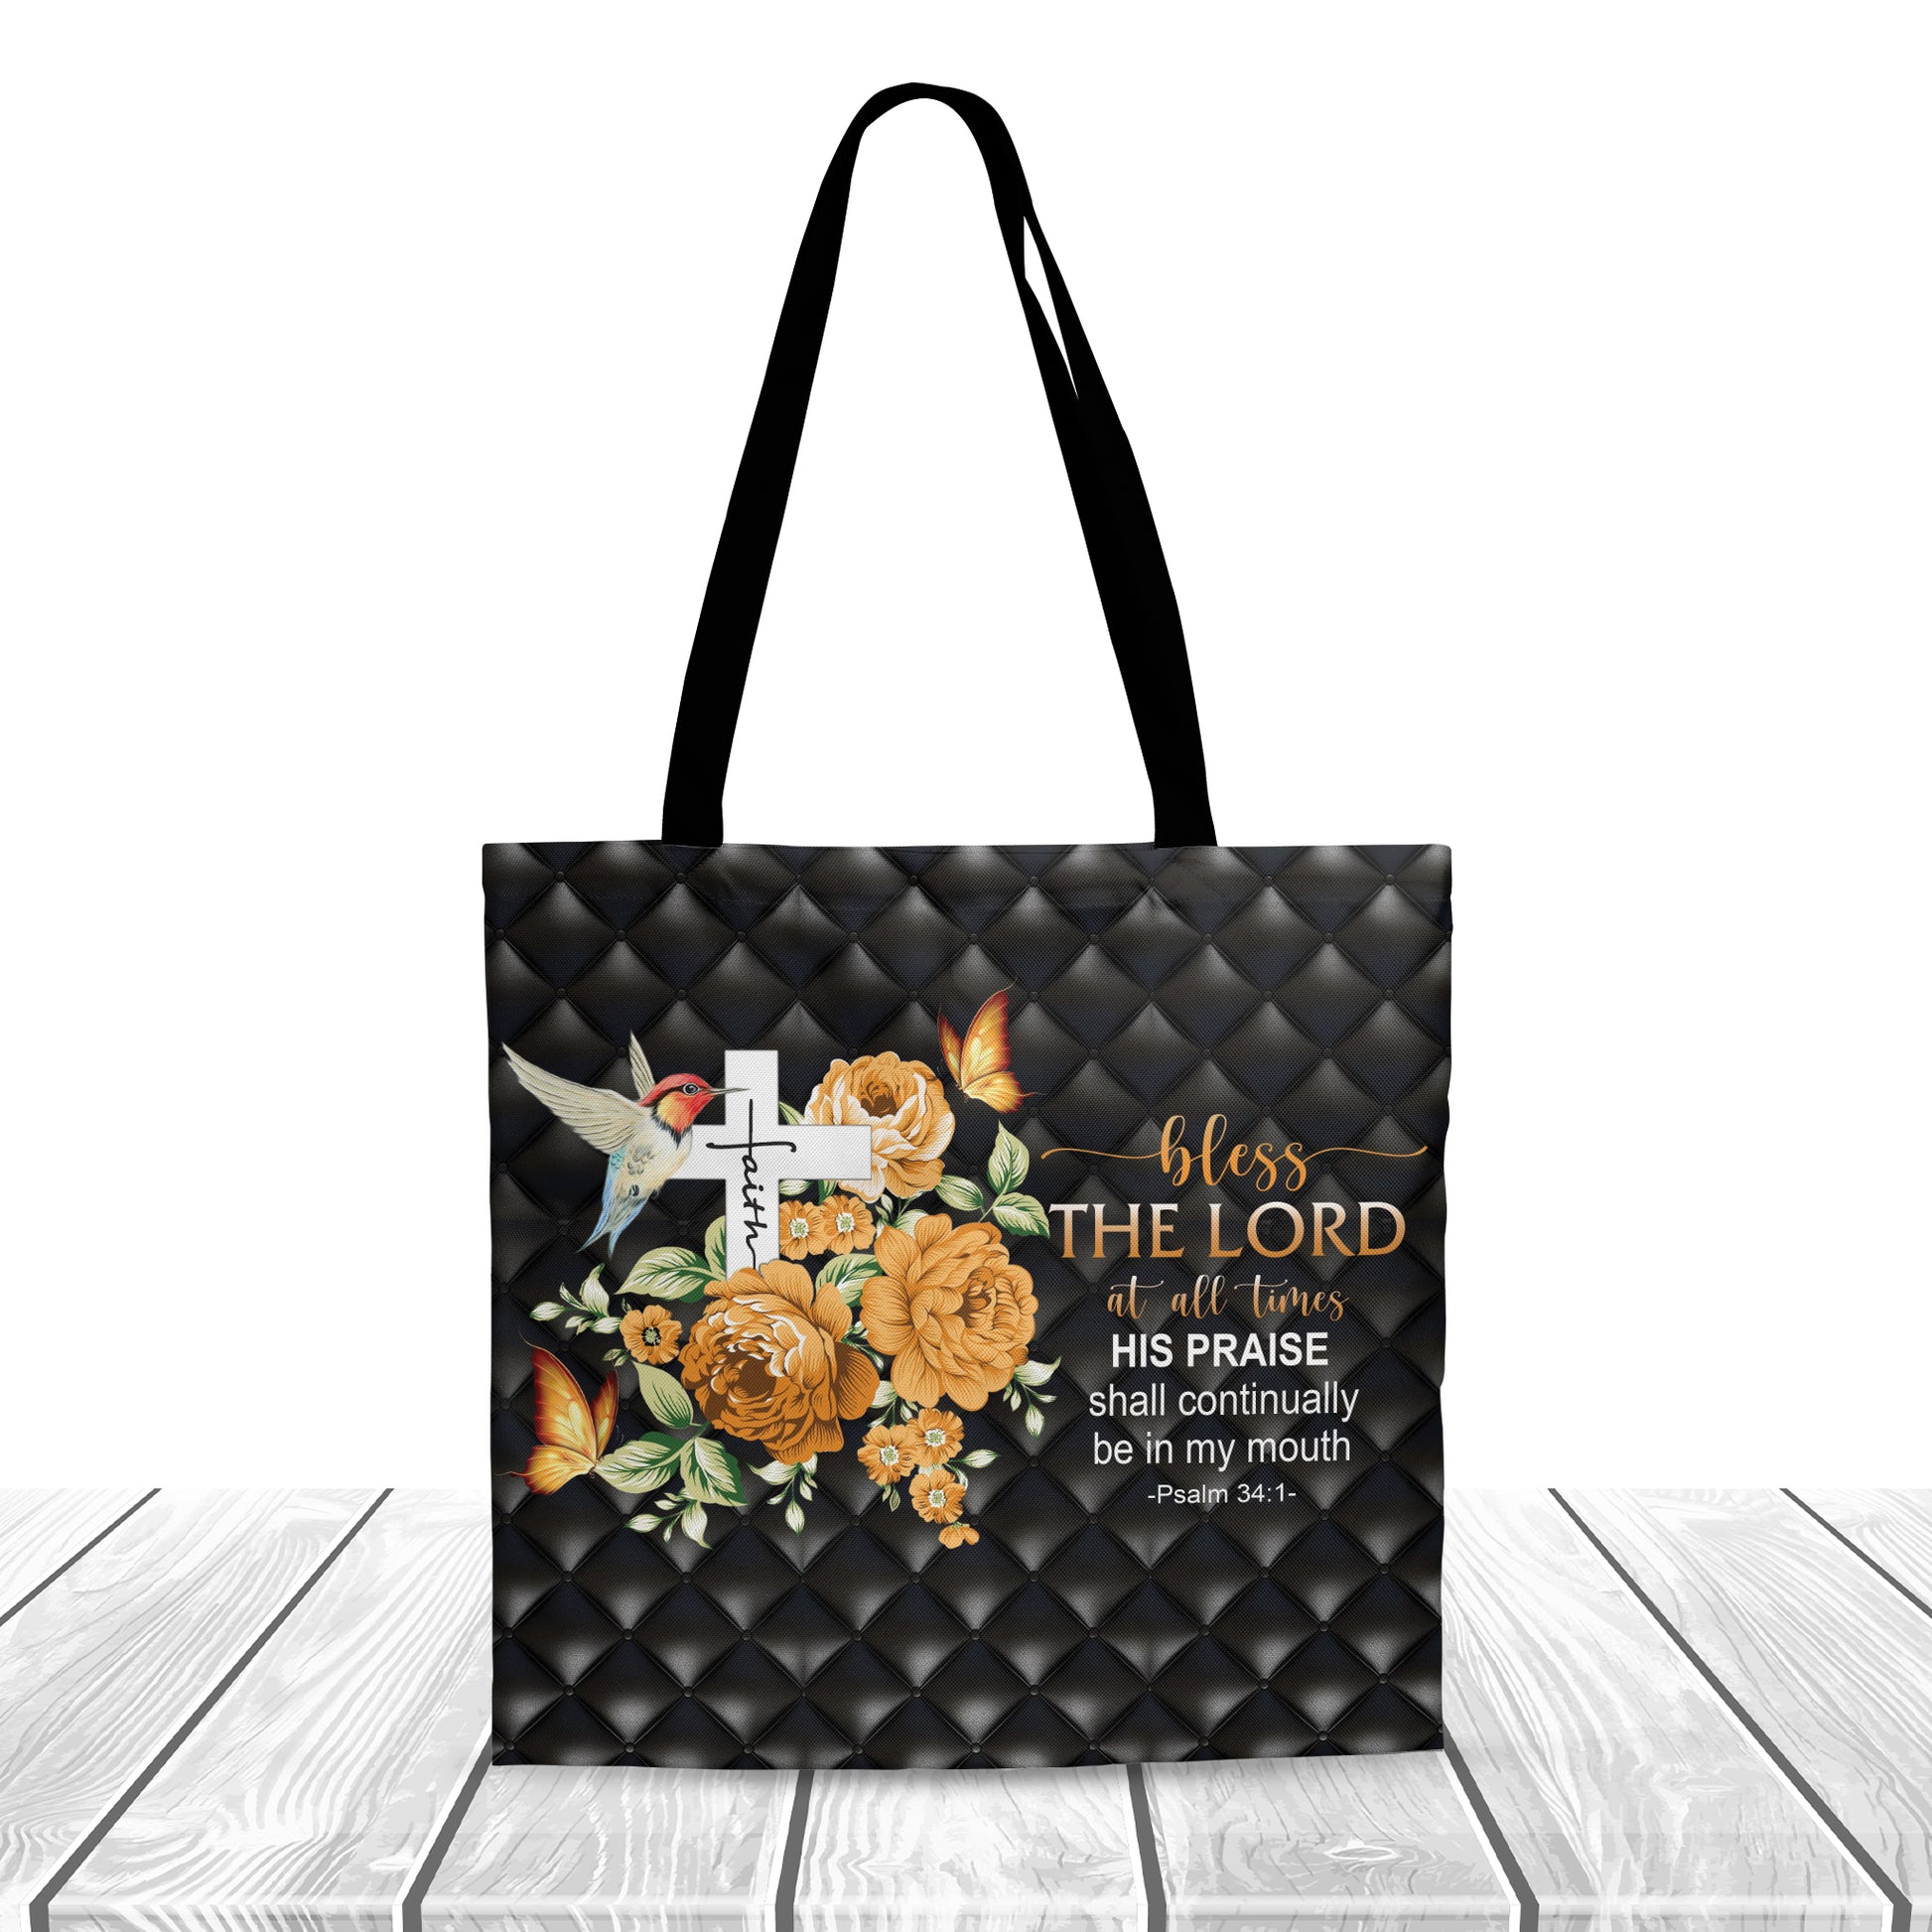 Christianart Handbag, Personalized Hand Bag, I Will Bless The Lord At All Times, Personalized Gifts, Gifts for Women. - Christian Art Bag